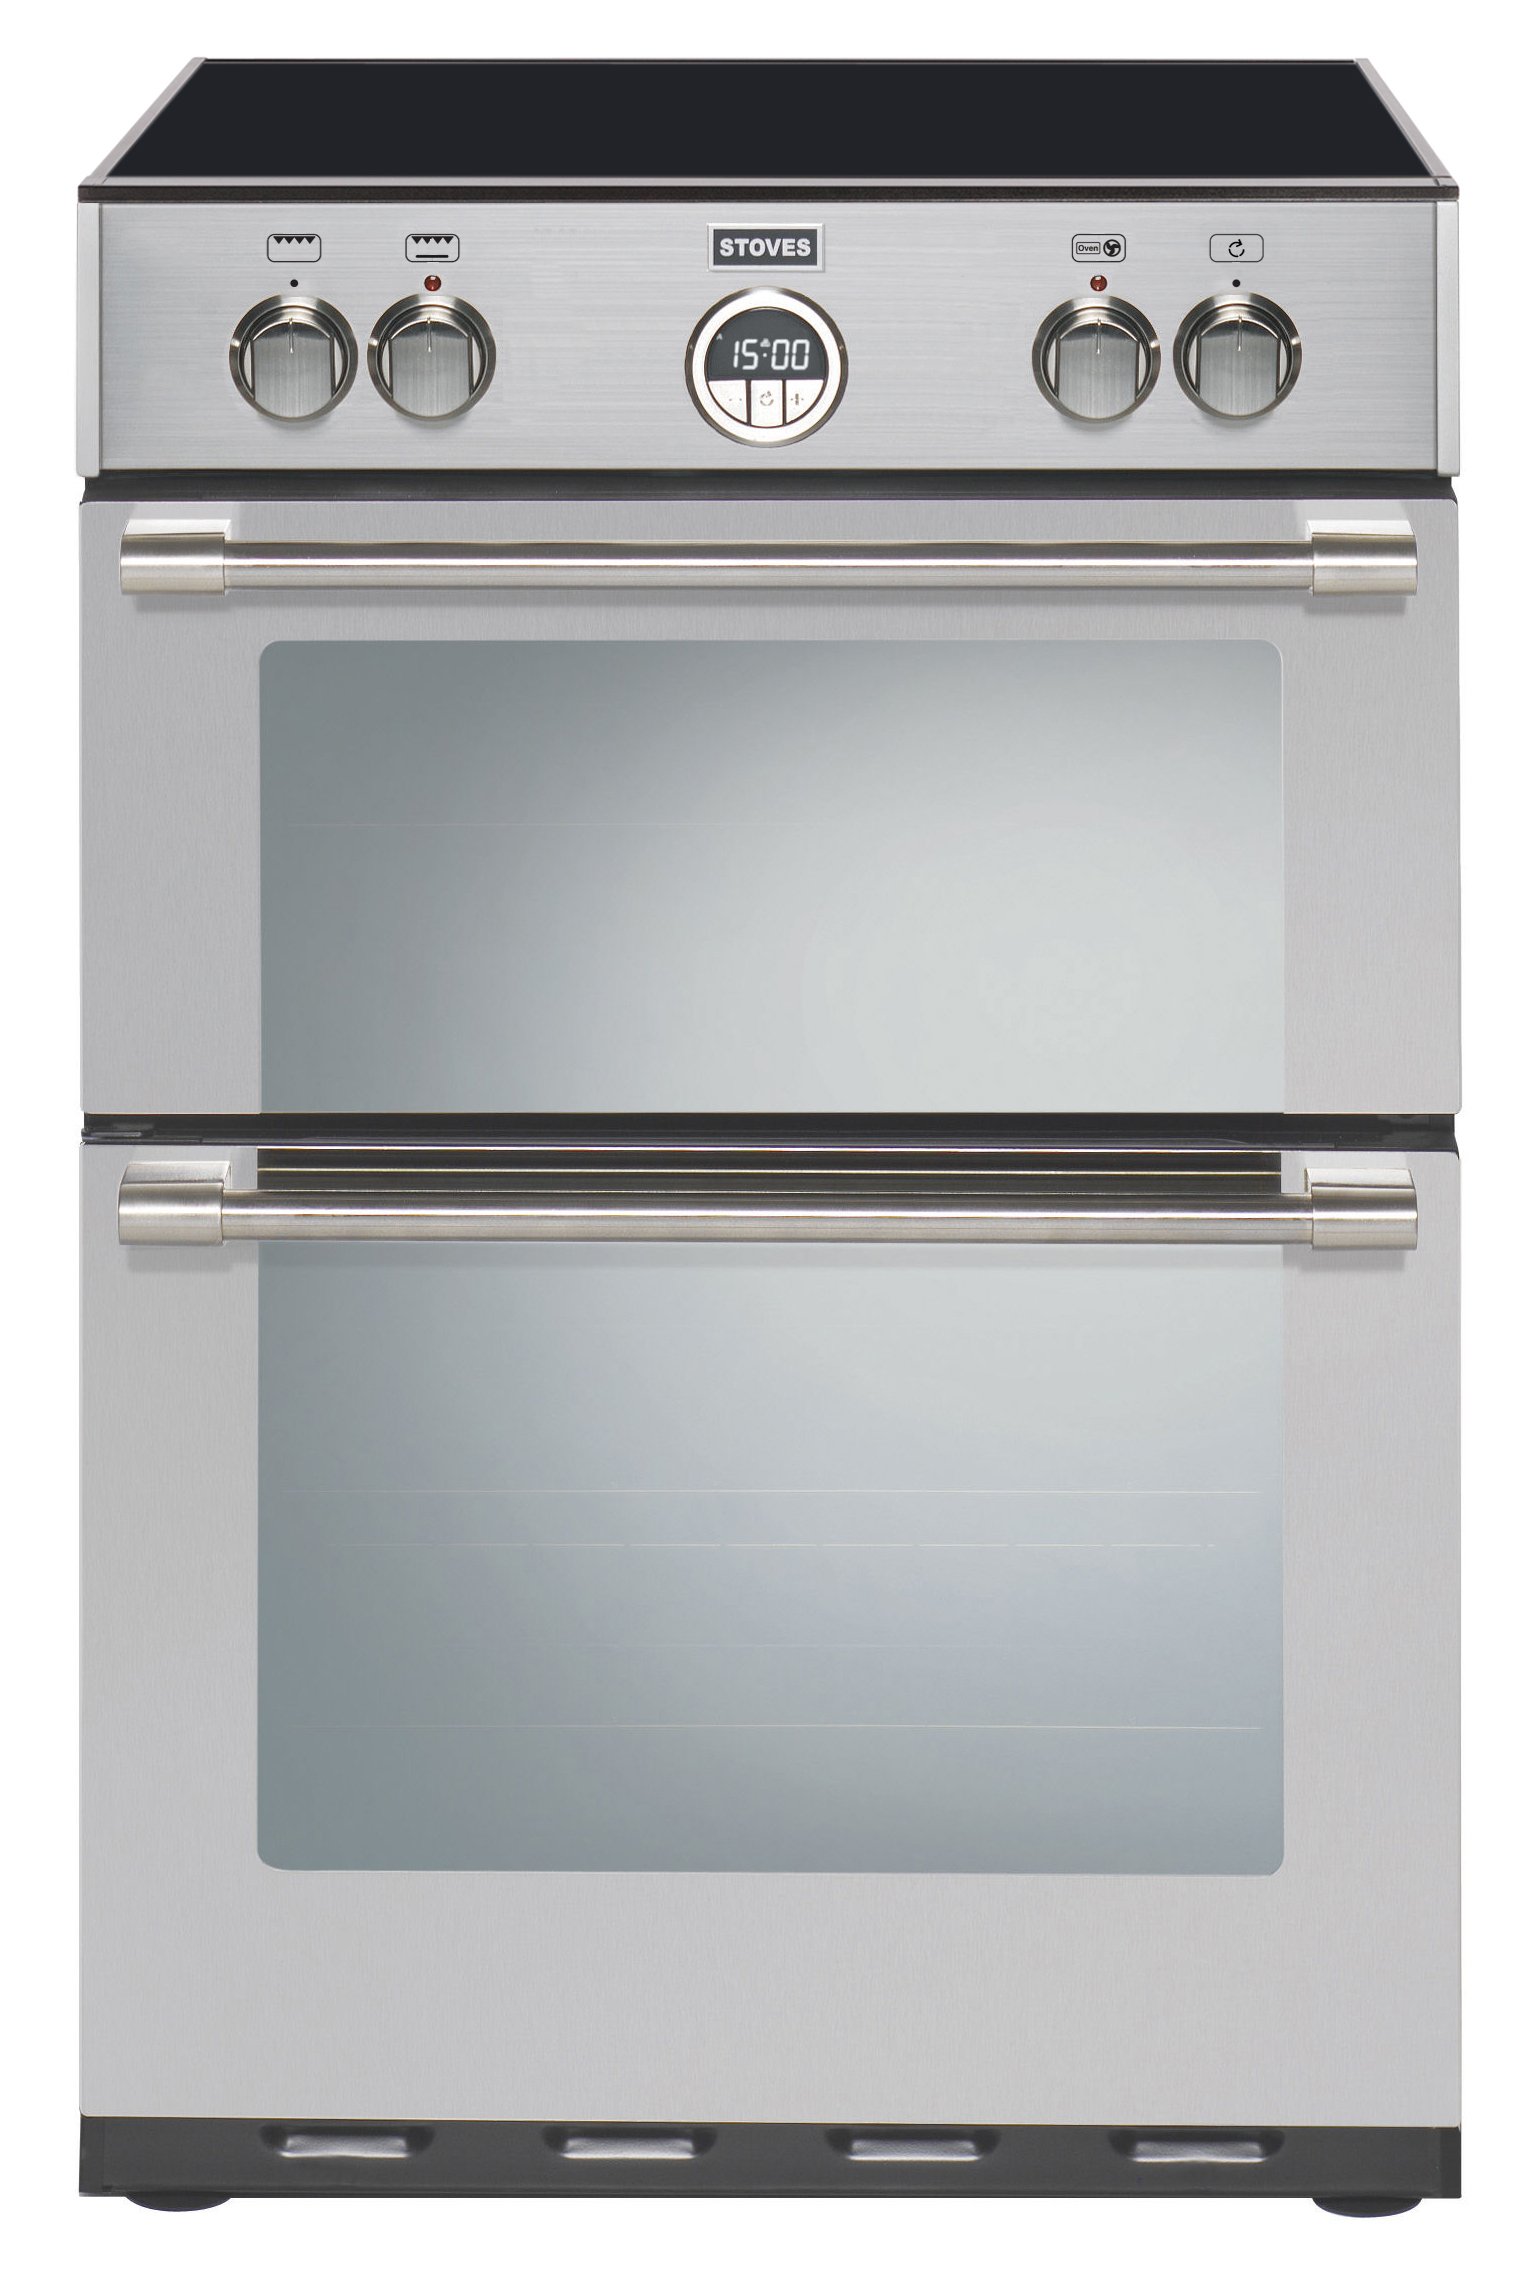 60cm Electric Range Cooker With A 4 Zone Electric Induction Hob, Conventional Oven & Grill and Multifunction Main Oven